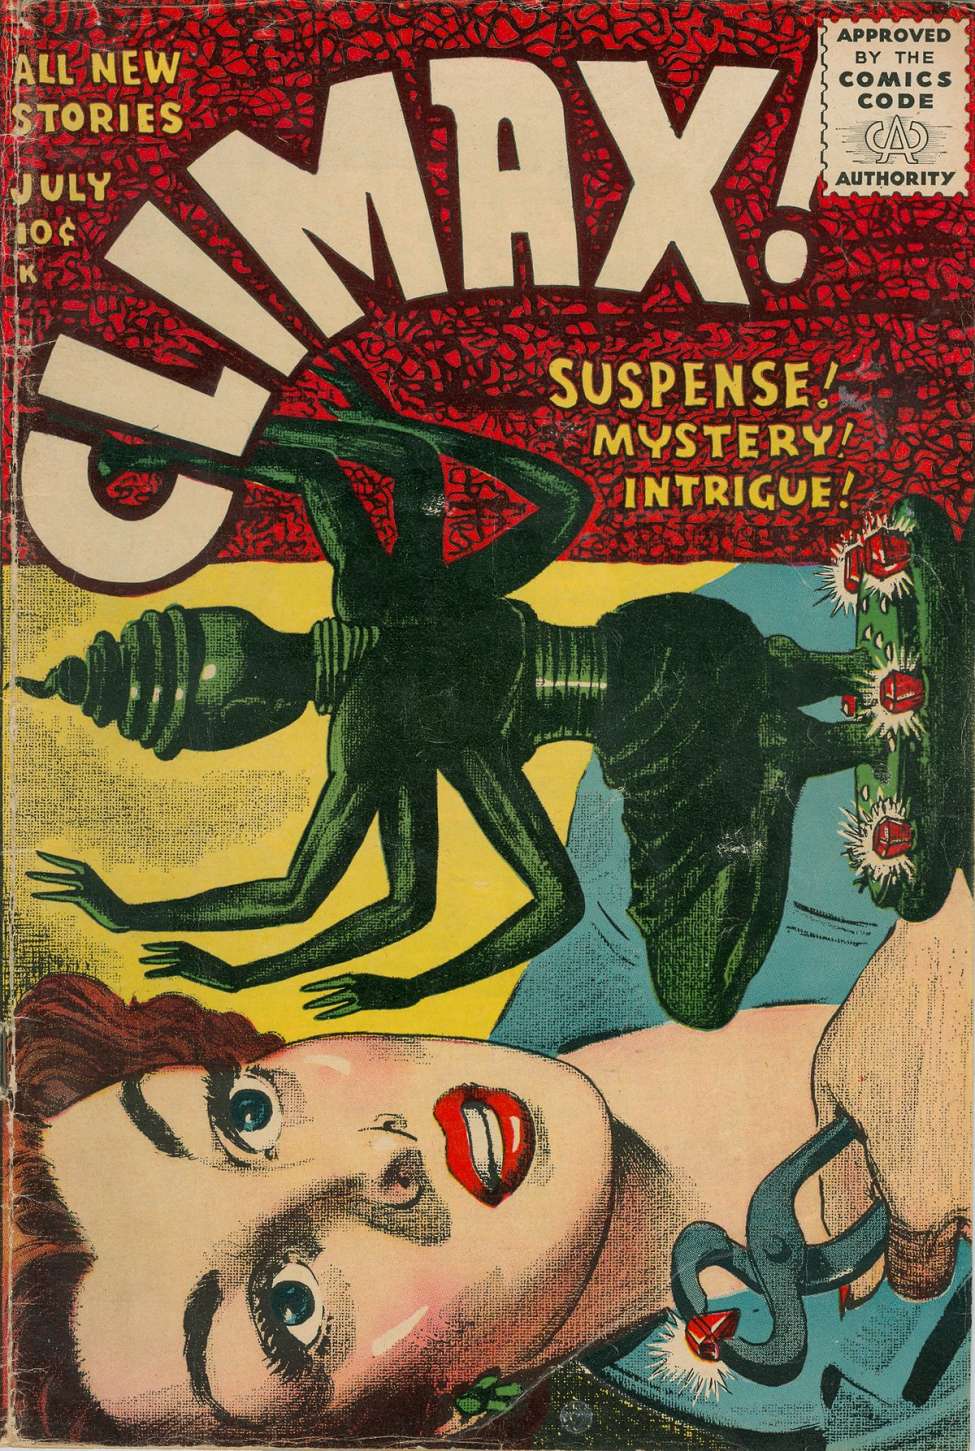 Book Cover For Climax 1